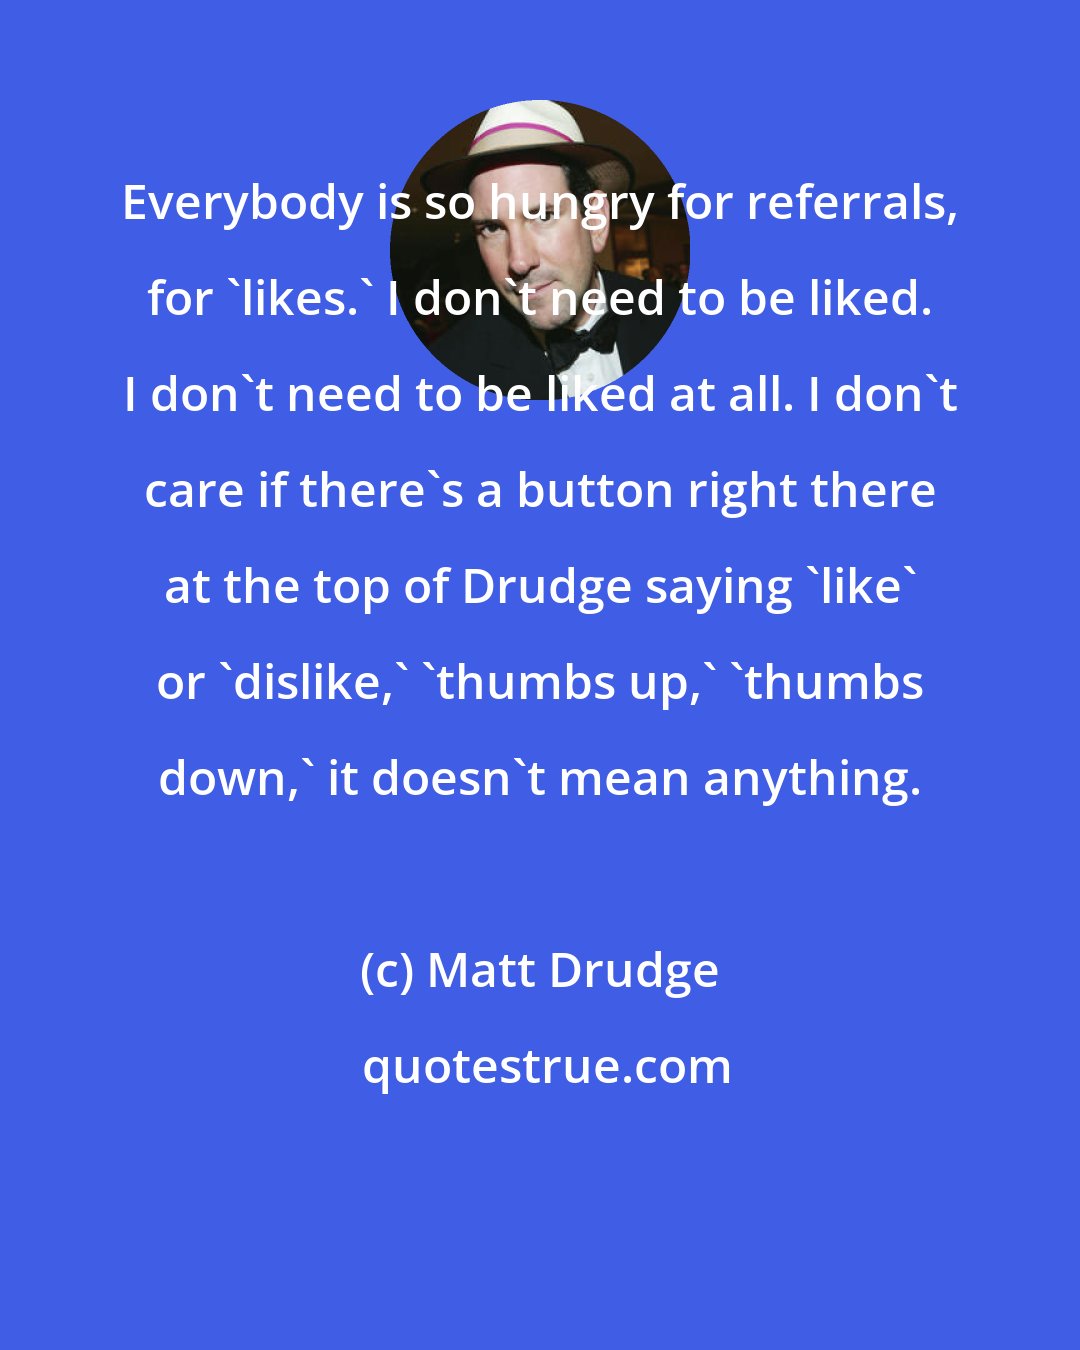 Matt Drudge: Everybody is so hungry for referrals, for 'likes.' I don't need to be liked. I don't need to be liked at all. I don't care if there's a button right there at the top of Drudge saying 'like' or 'dislike,' 'thumbs up,' 'thumbs down,' it doesn't mean anything.